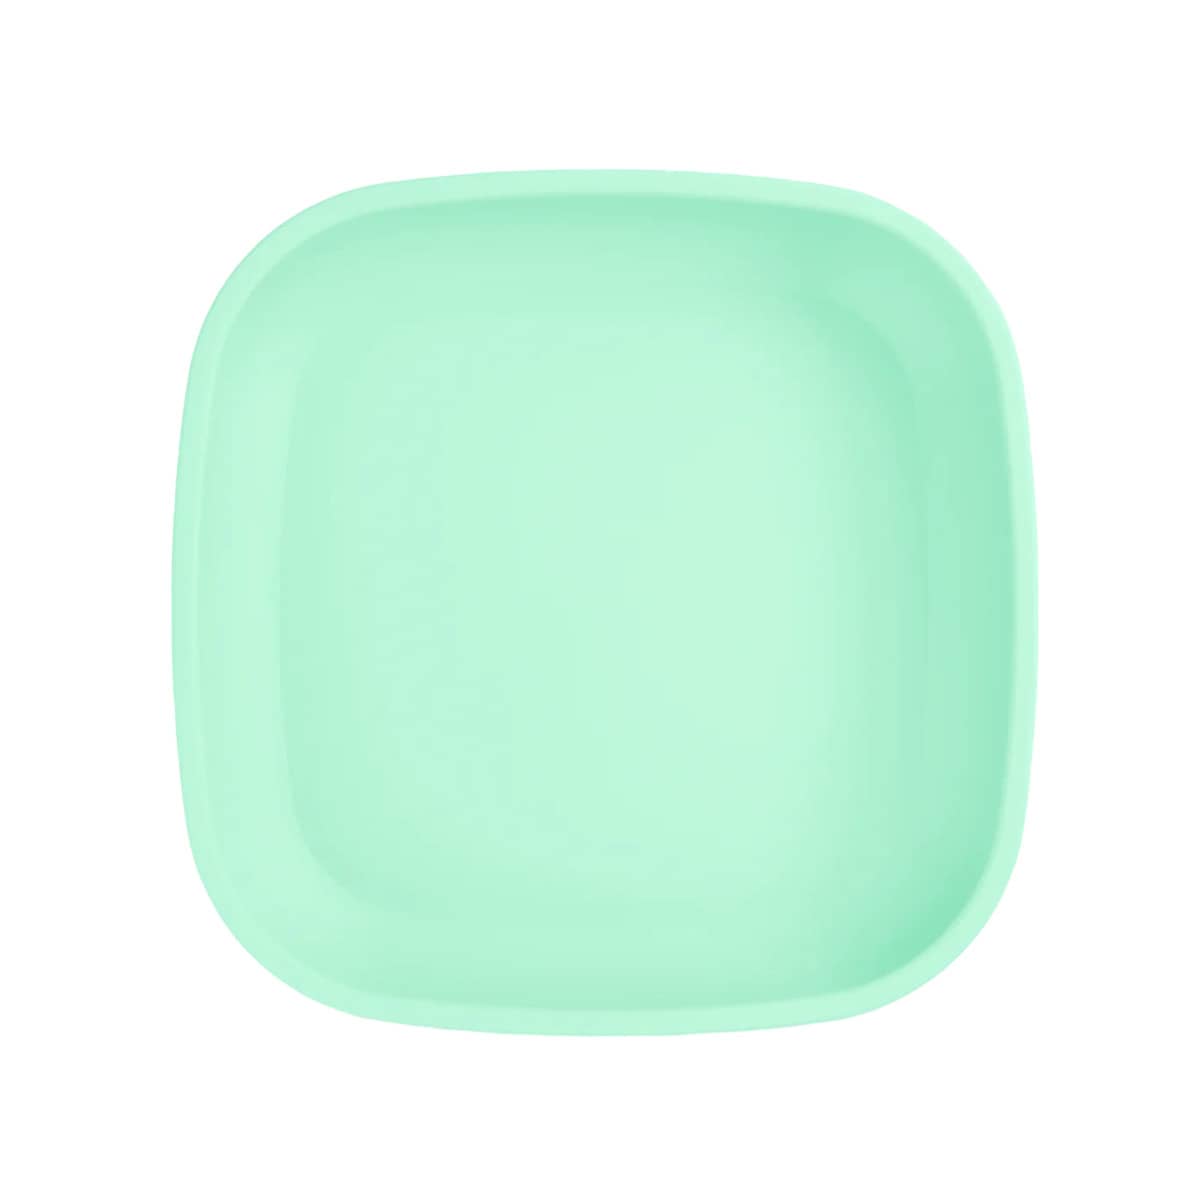 Re-Play Recycled Flat Plate - Naturals Collection - Mint